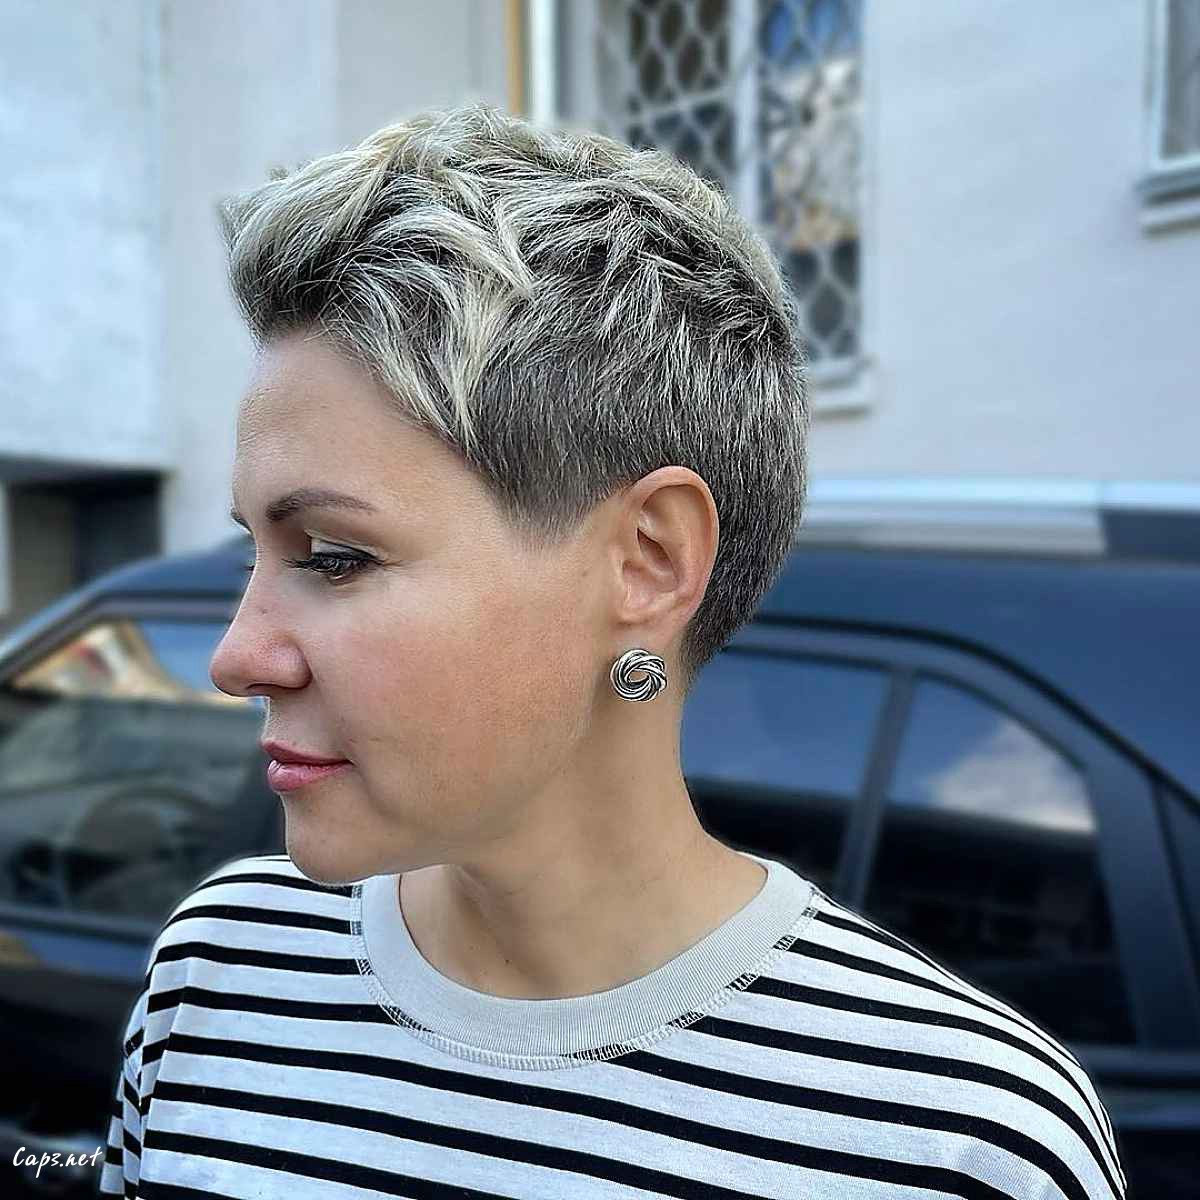 the cutest way to style a pixie cut